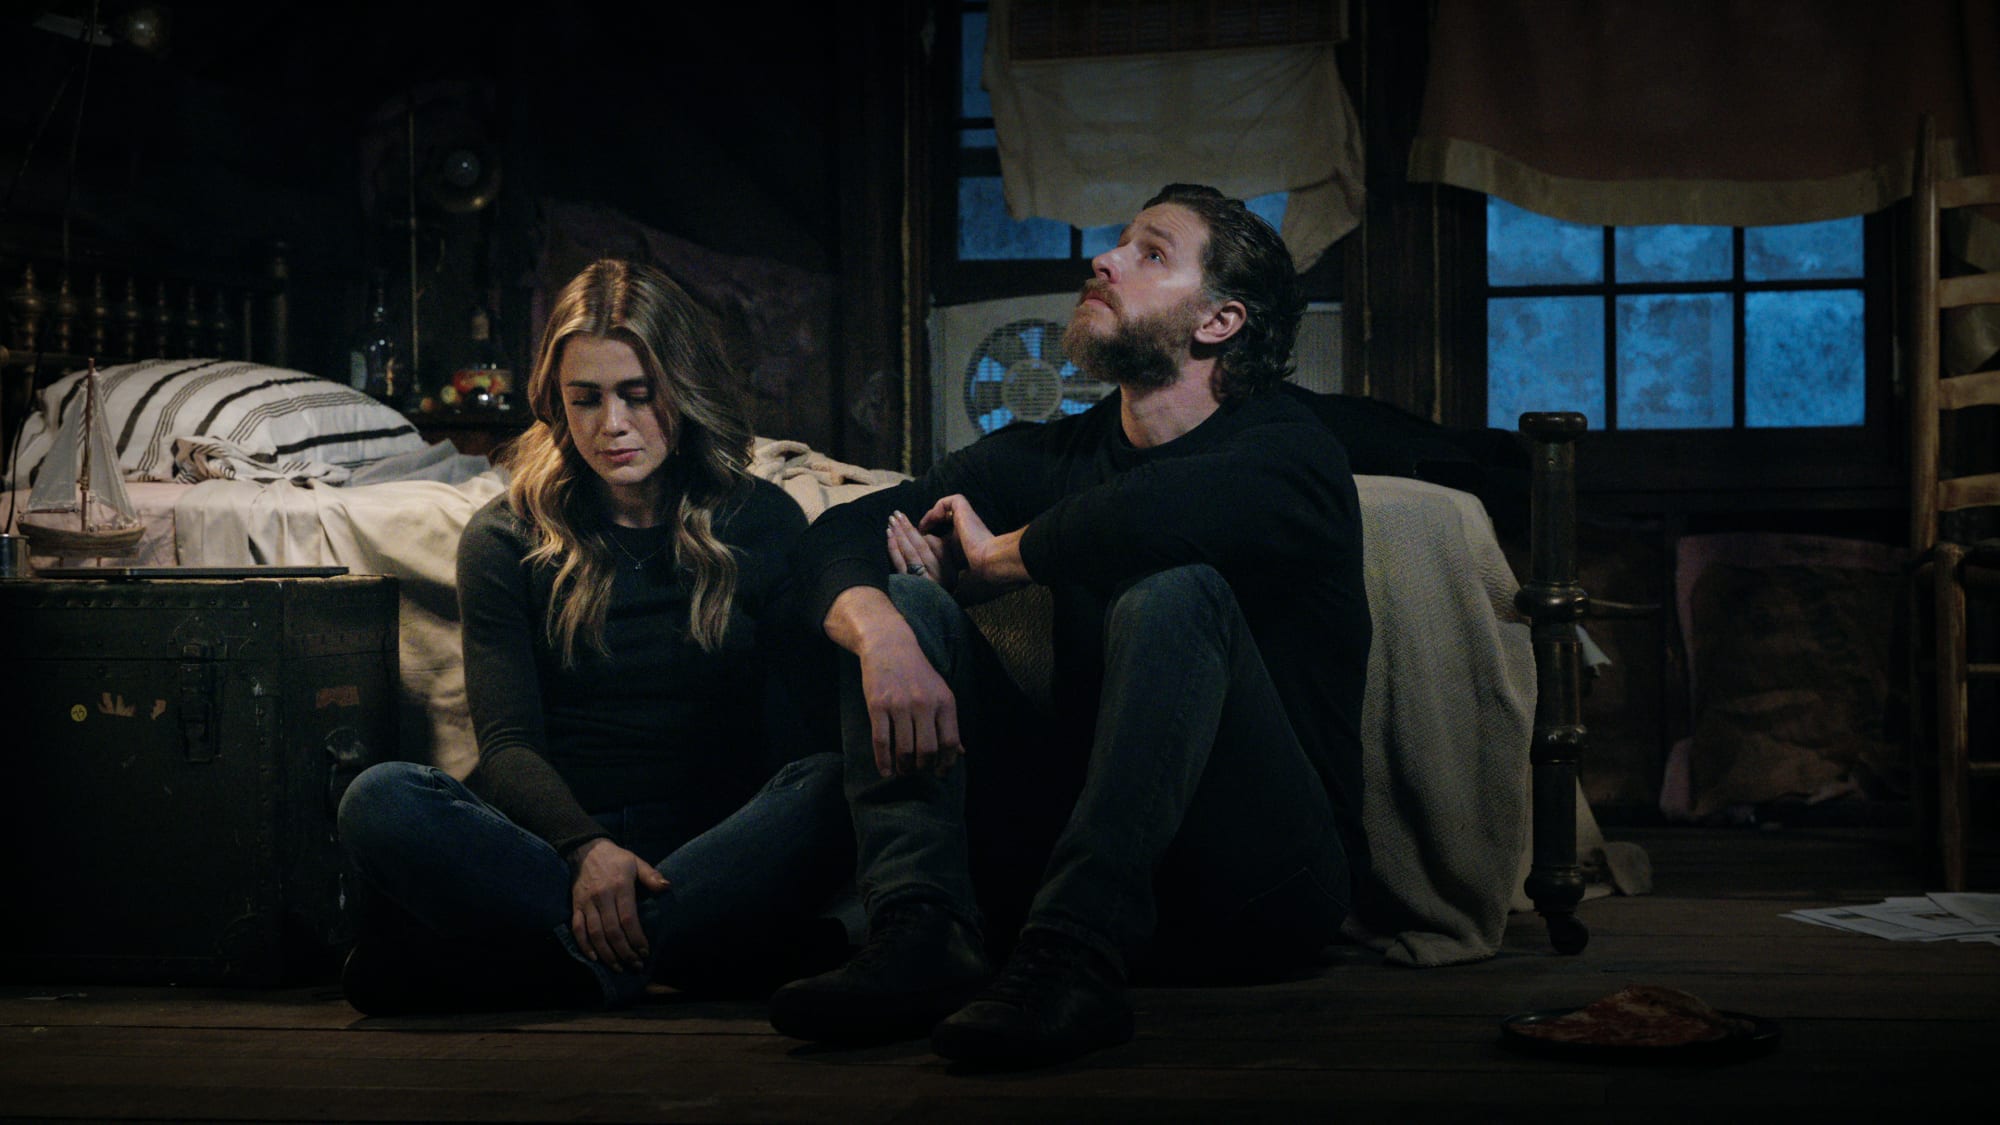 Manifest season 4 part 1 ending explained: Are the passengers saved?